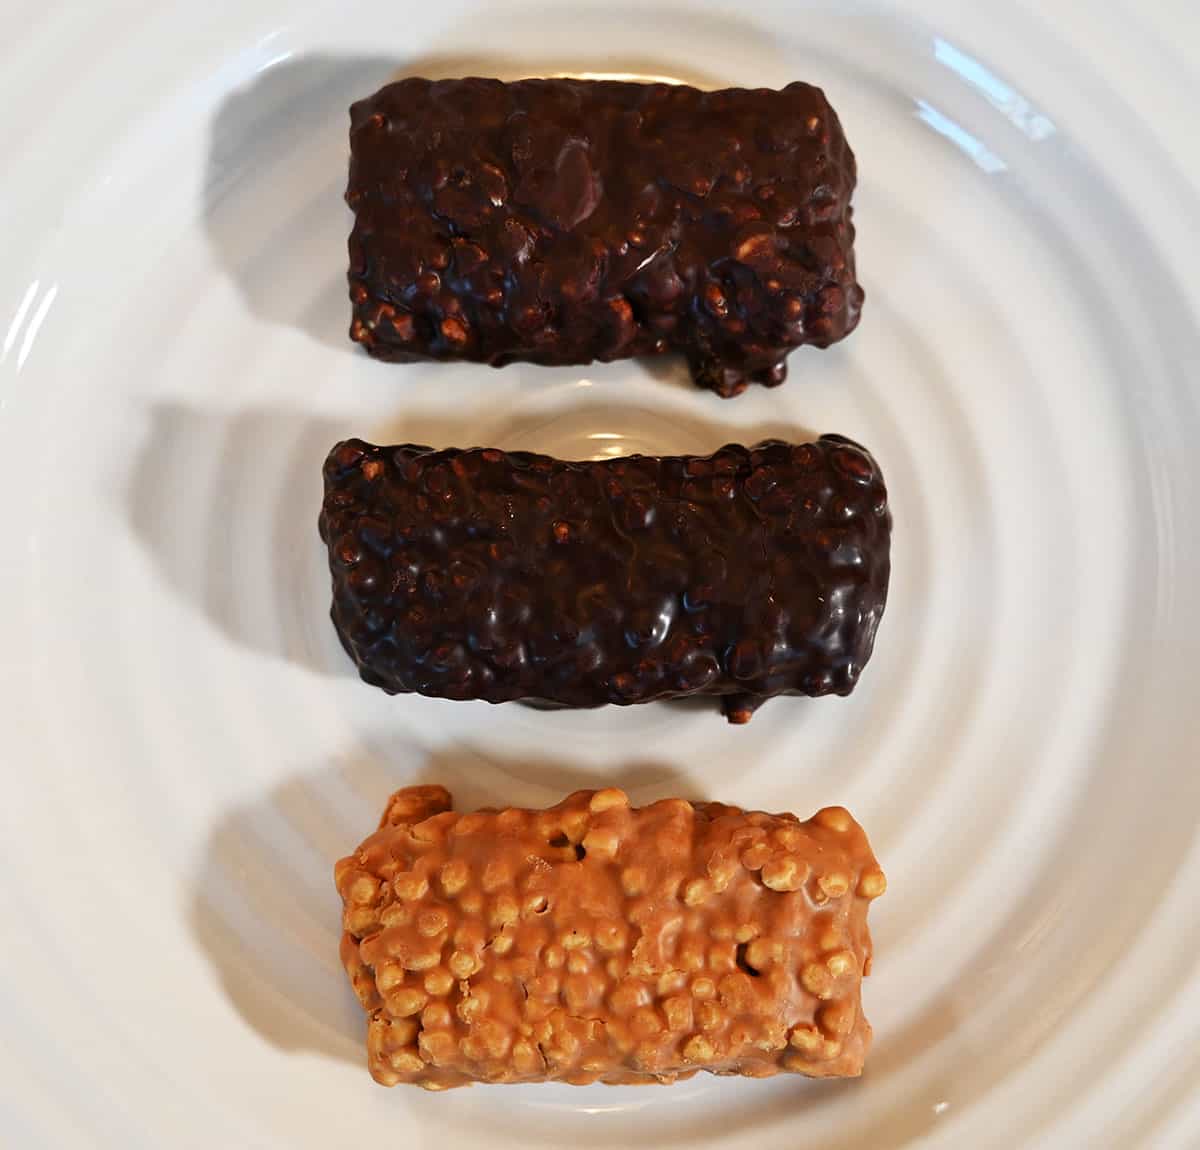 All three flavors of protein bars out of their packaging on a plate. Top to bottom, caramel almond, choco crisp and peanut butter.